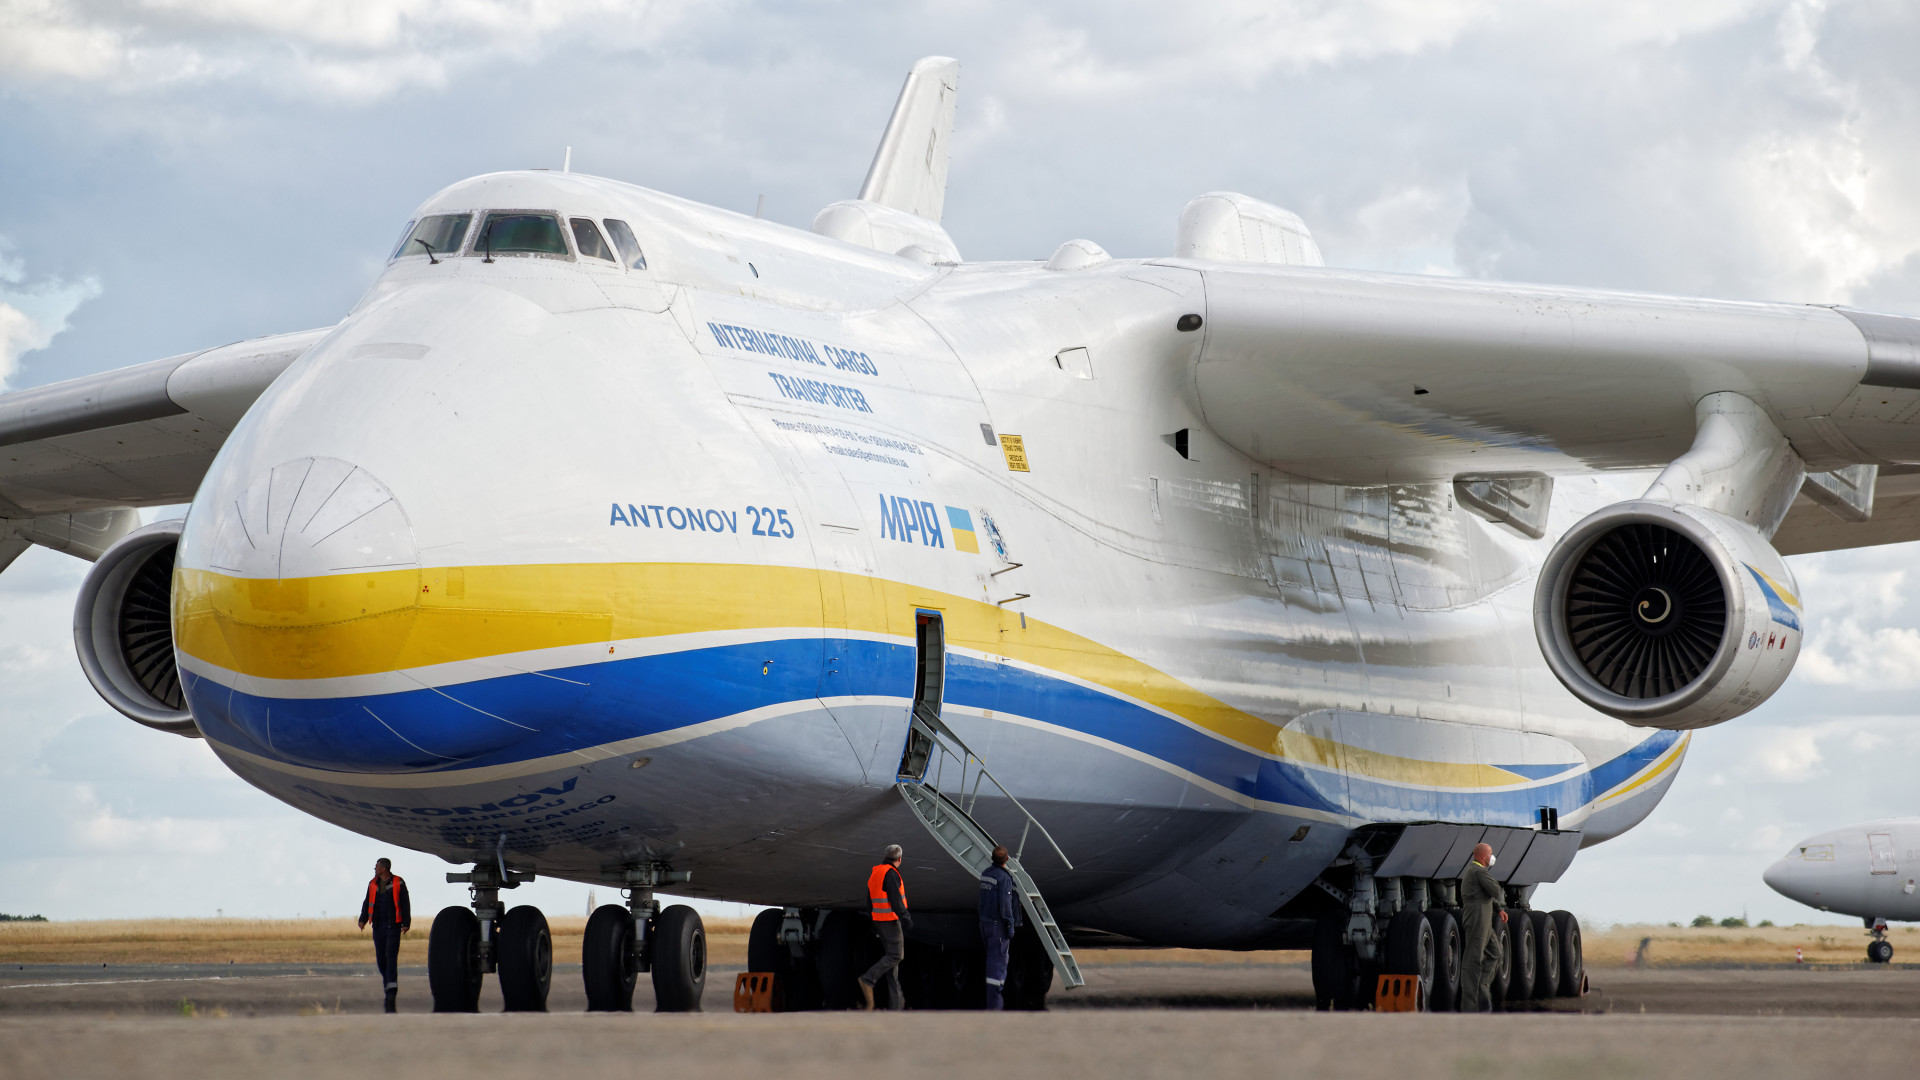 The investigation begins: the authorities will discover from the dawn of the largest plane in the world